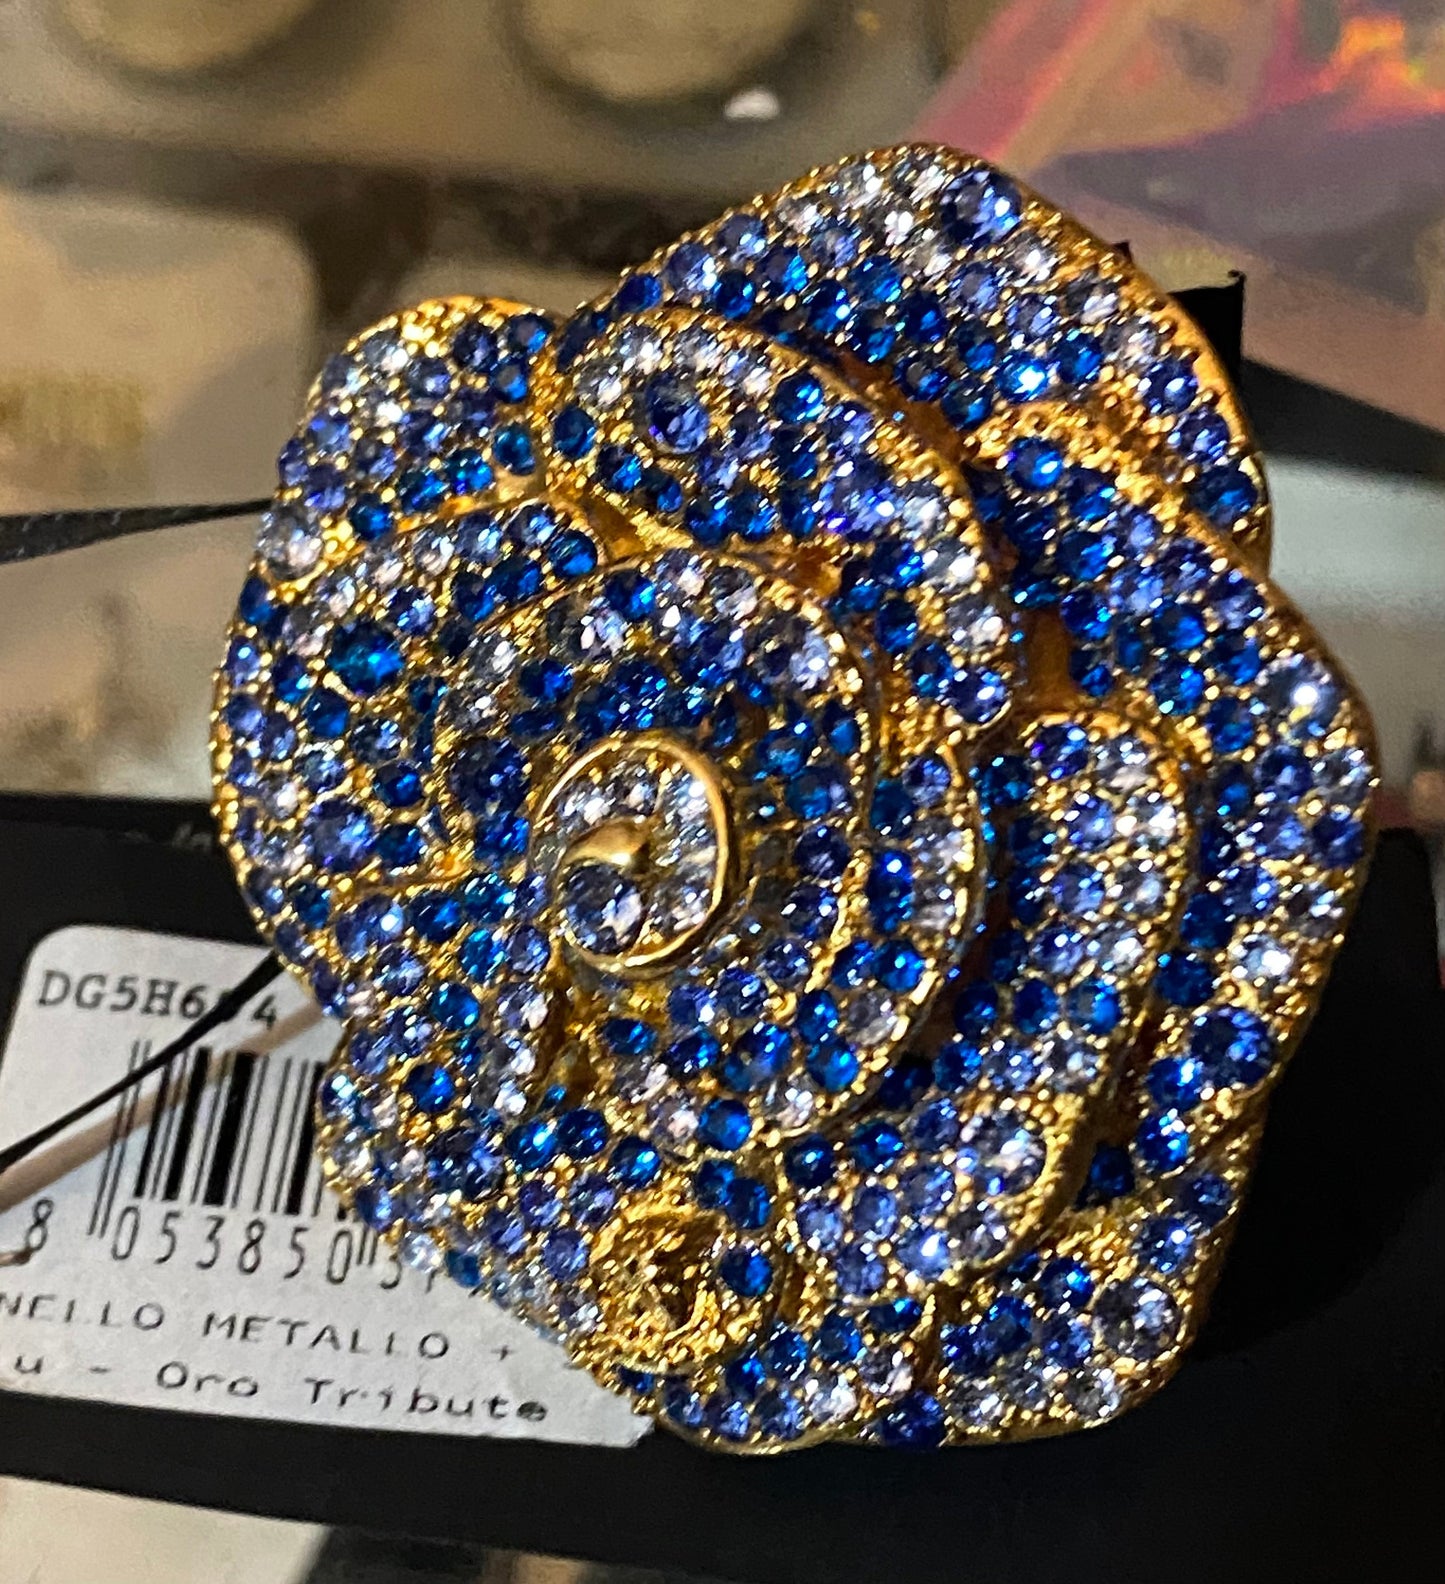 Versace tribute huge gold plated rose flower ring fully coated in blue stresses, new